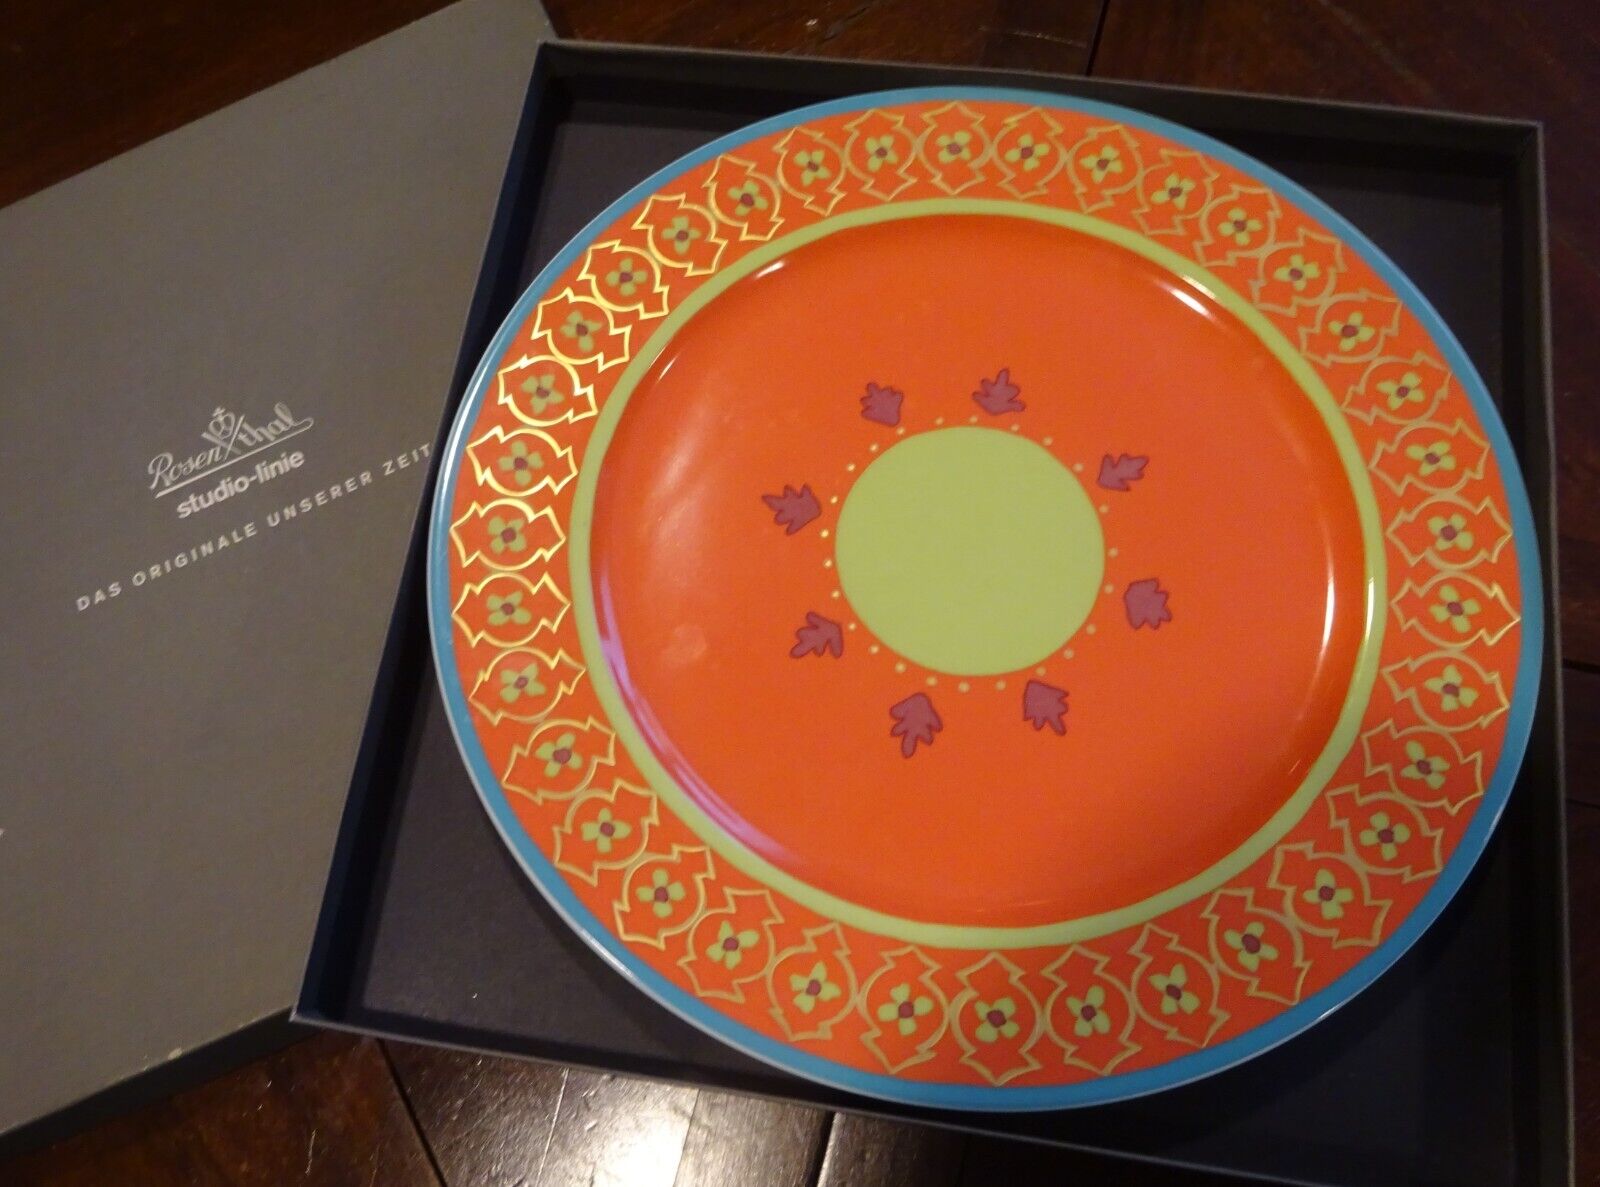 Lge. Rosenthal Studio-Linie Service / Charger Plate - Mamounia Pattern